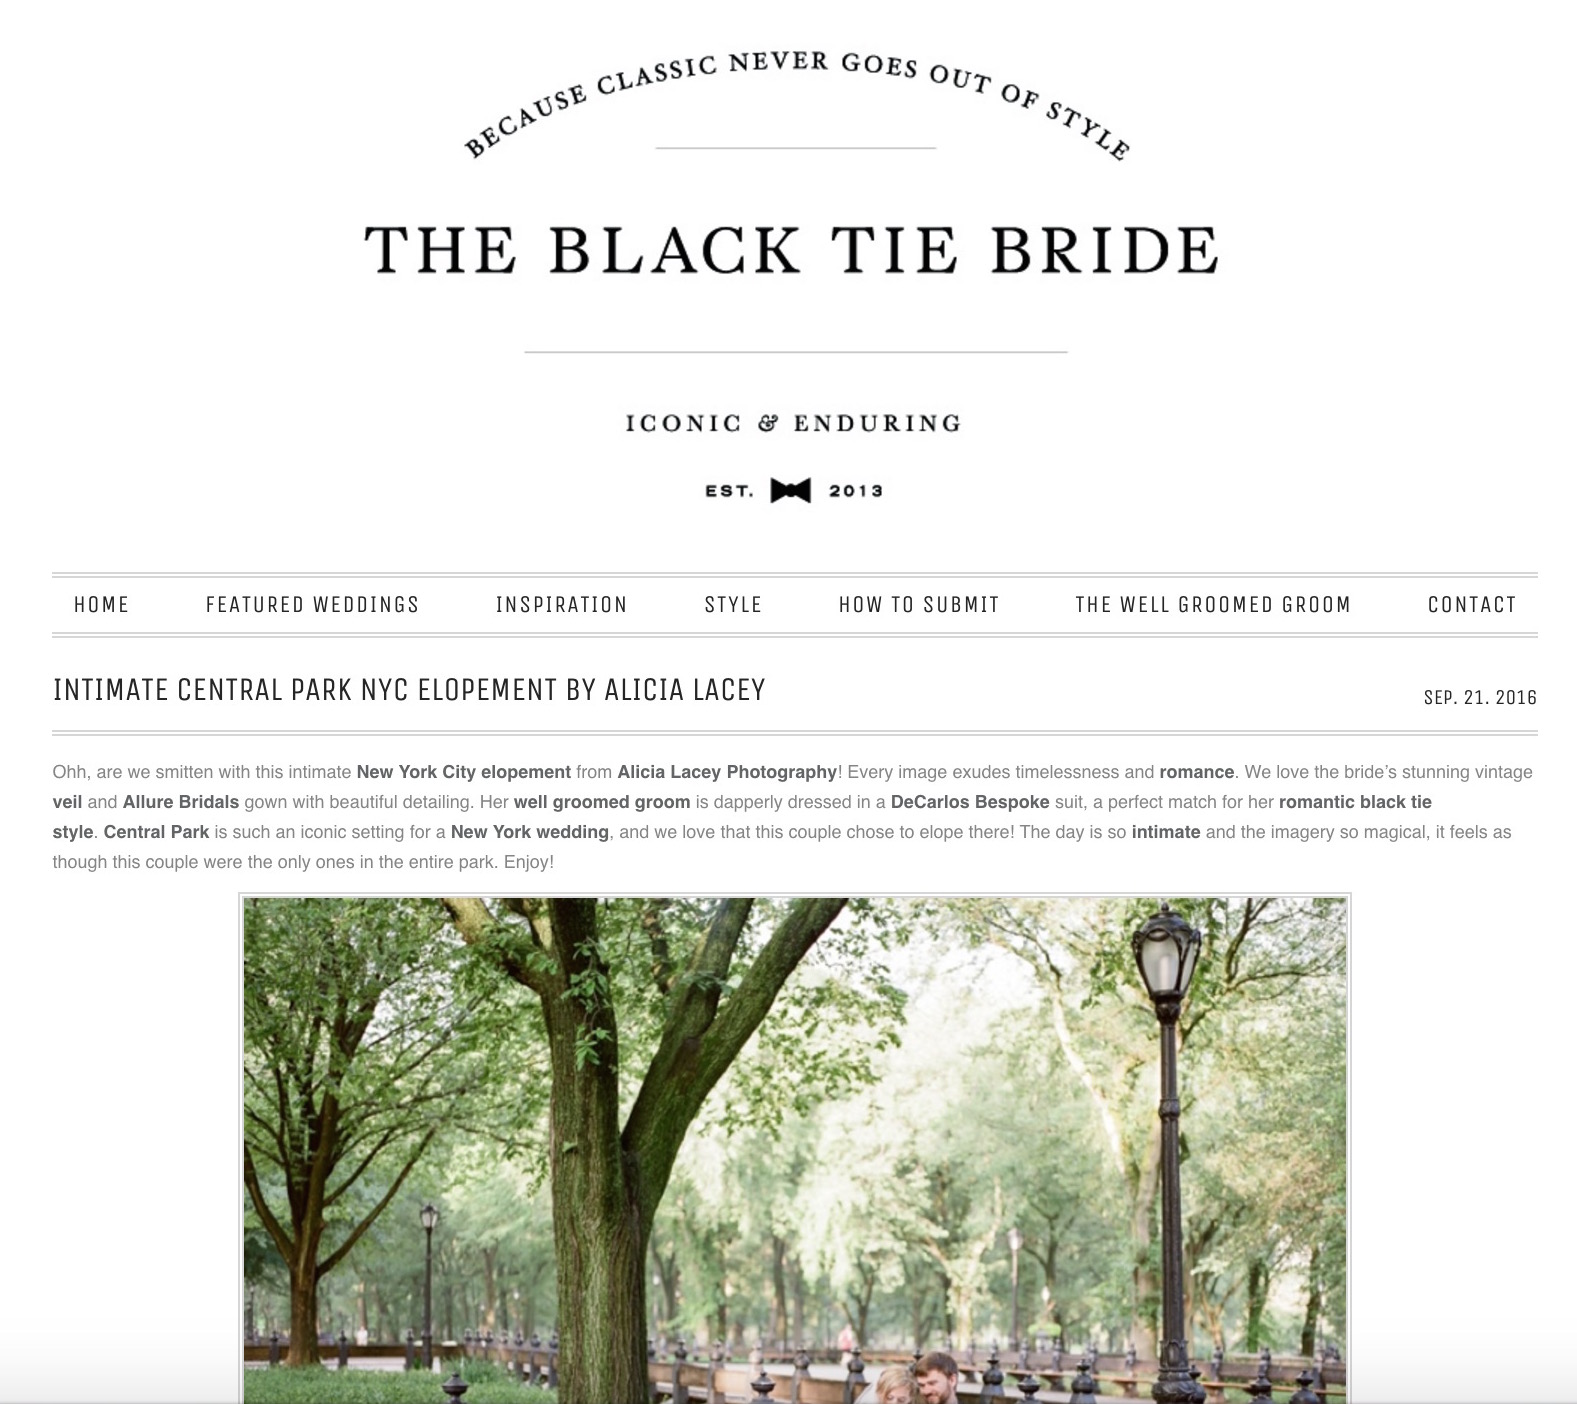 A classic NYC Central Park Elopement is featured on the equally timeless wedding blog, the Black Tie Bride.